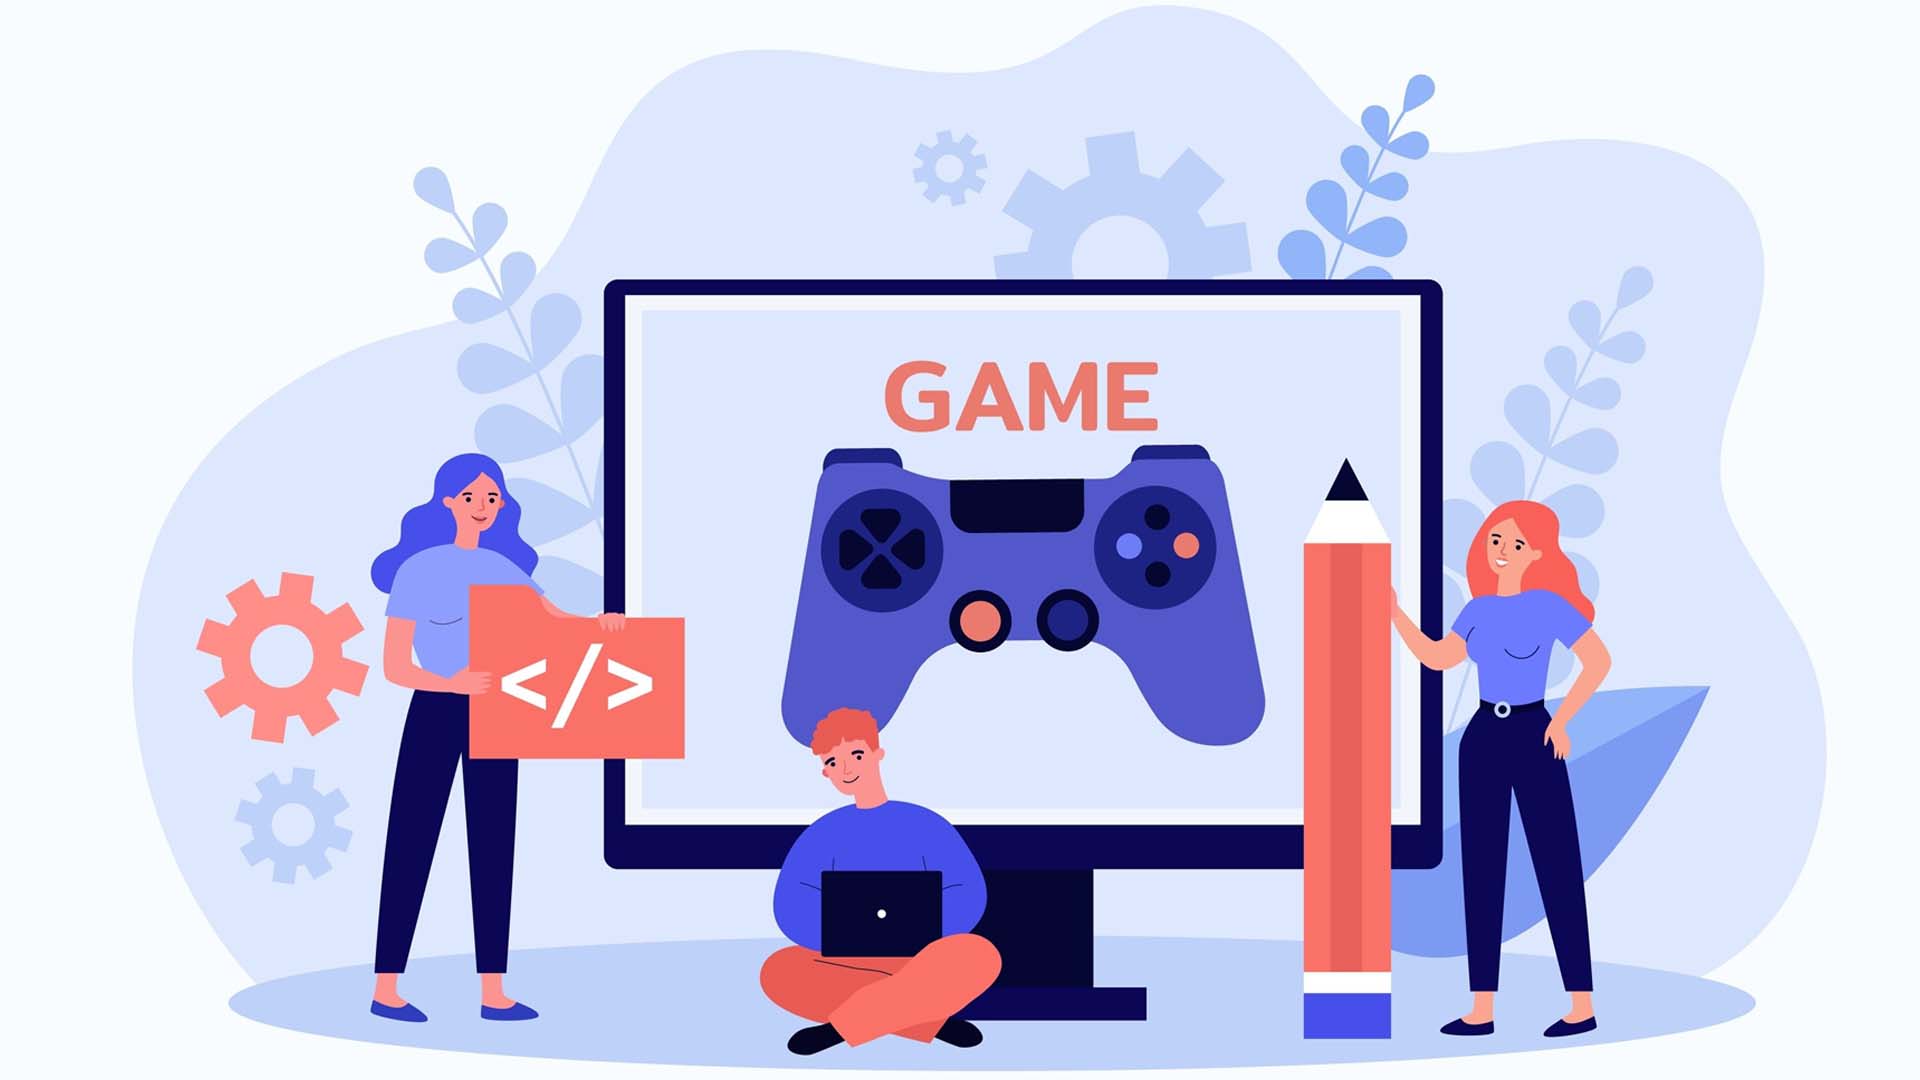 4 tips for effective microlearning gamification